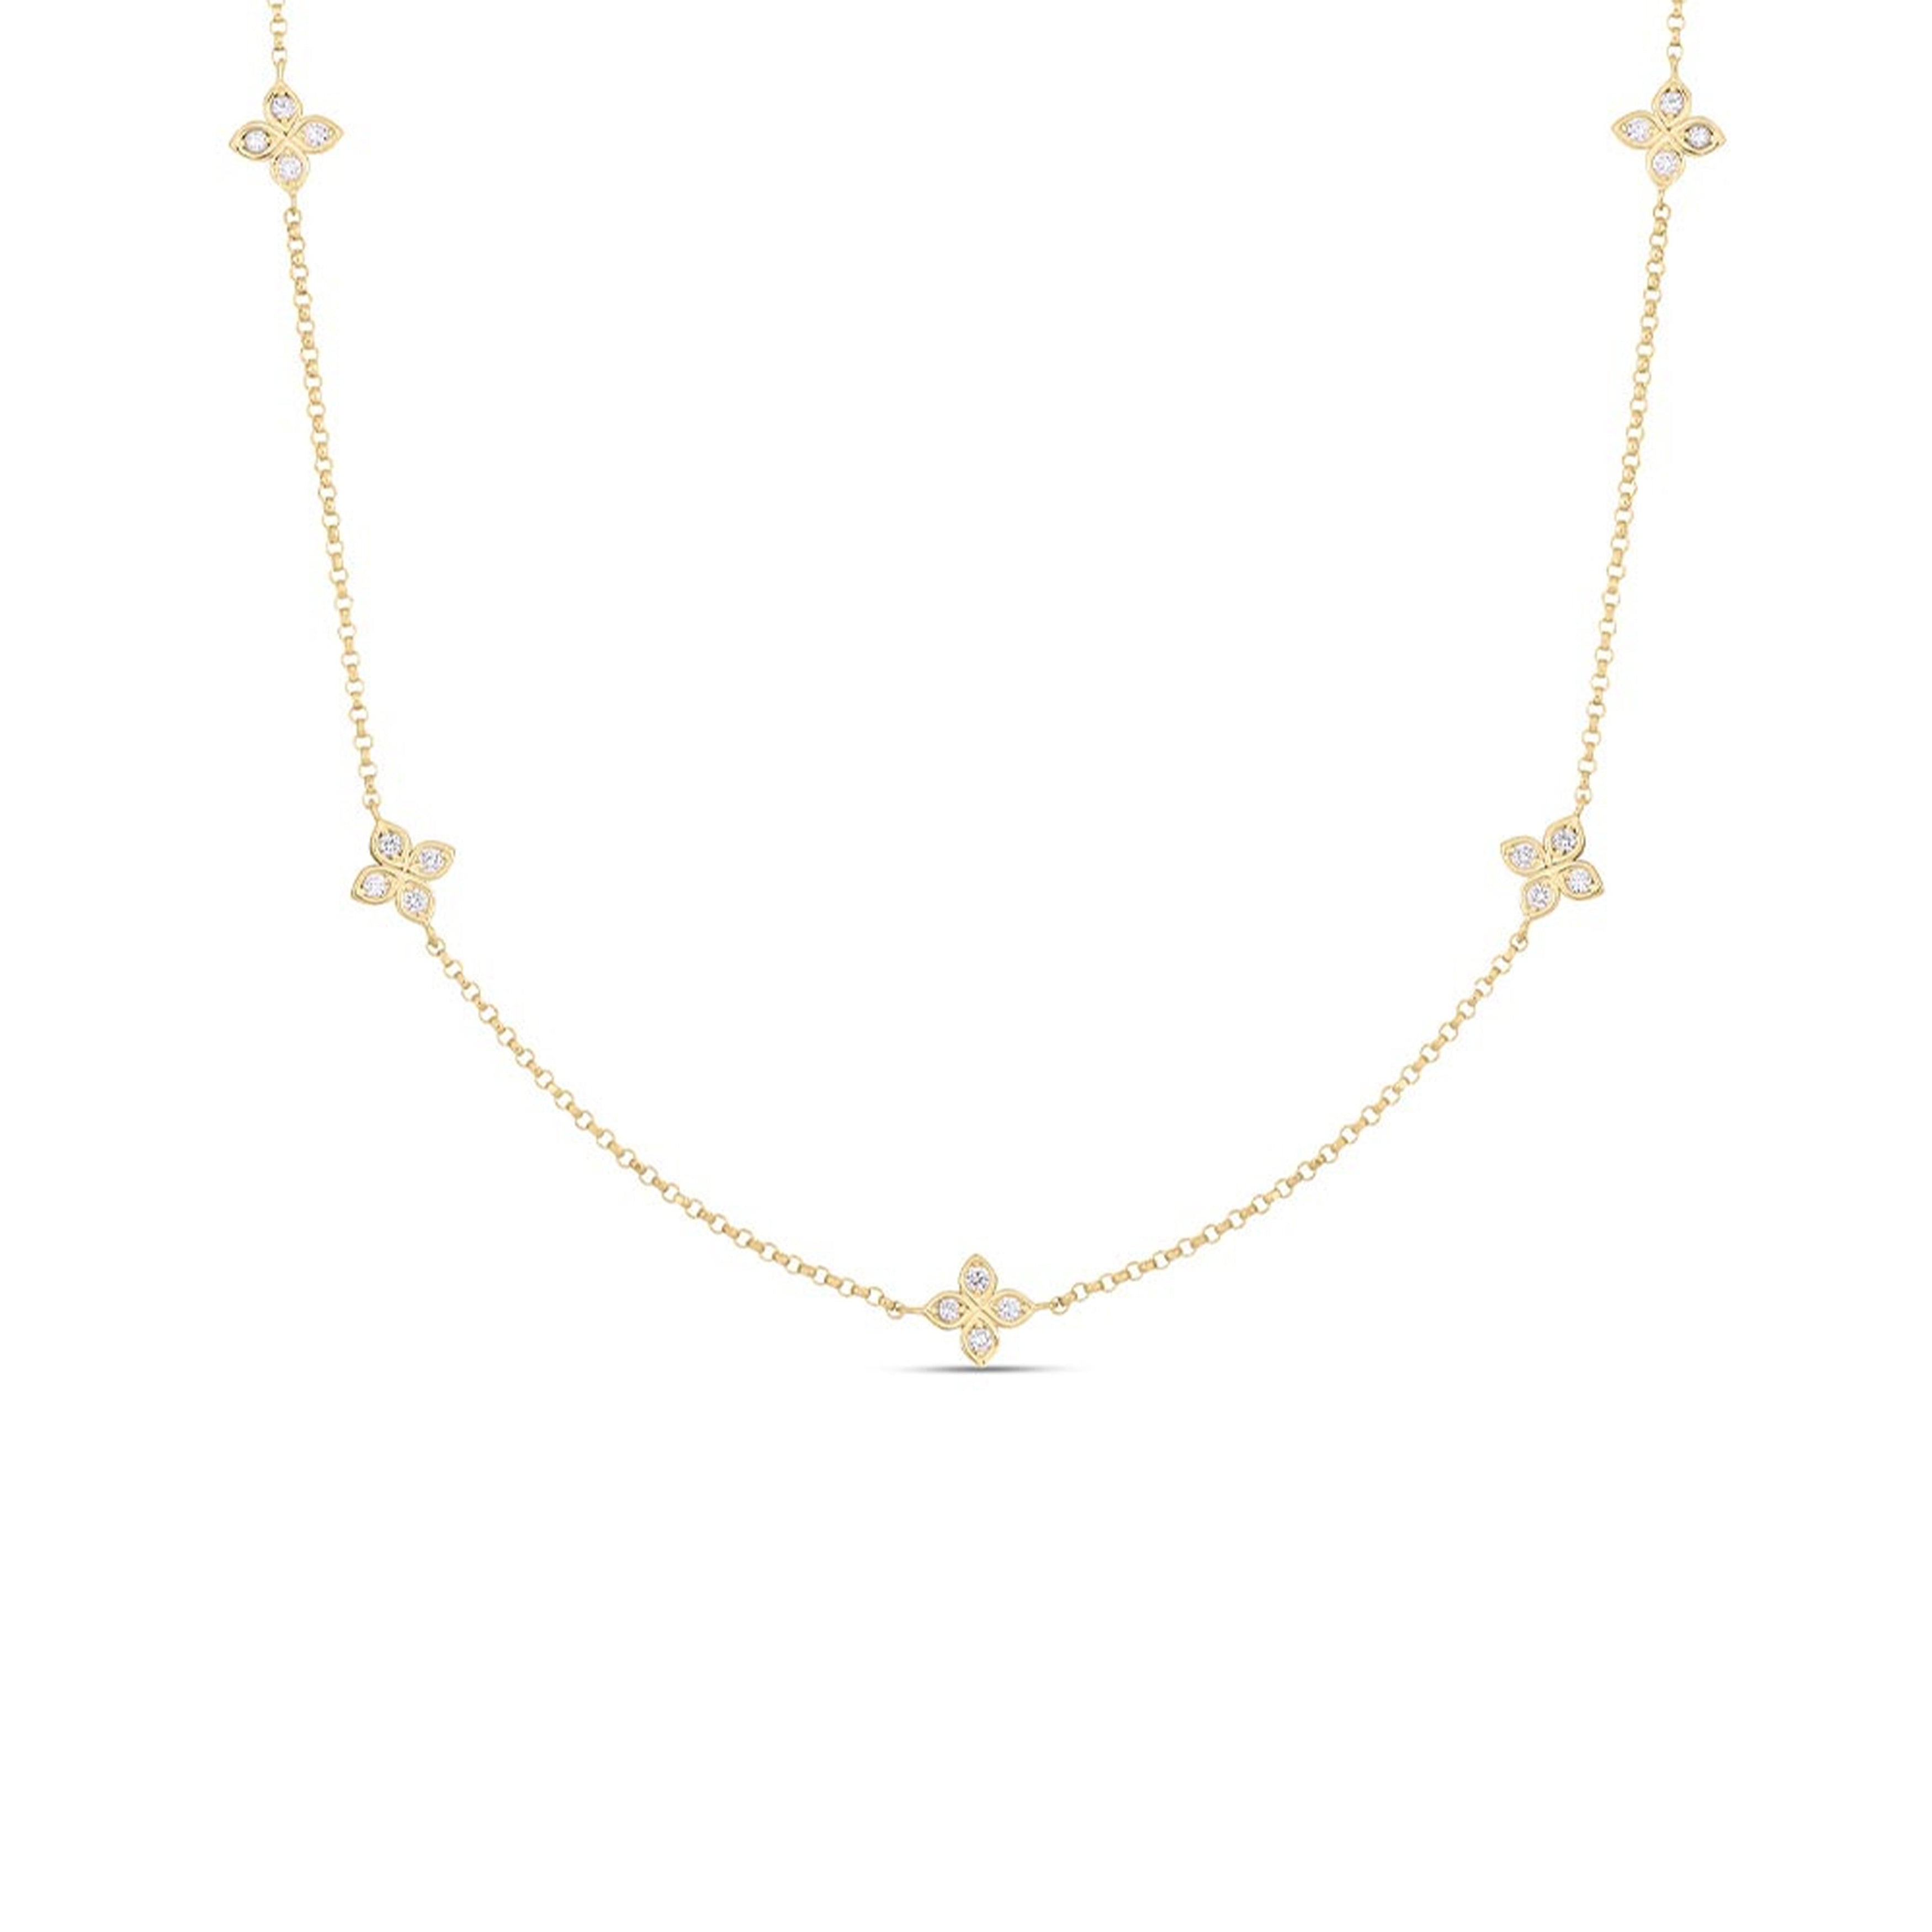 18K Yellow Gold Roberto Coin DIAMOND by the Inch 5 Station Diamond Necklace